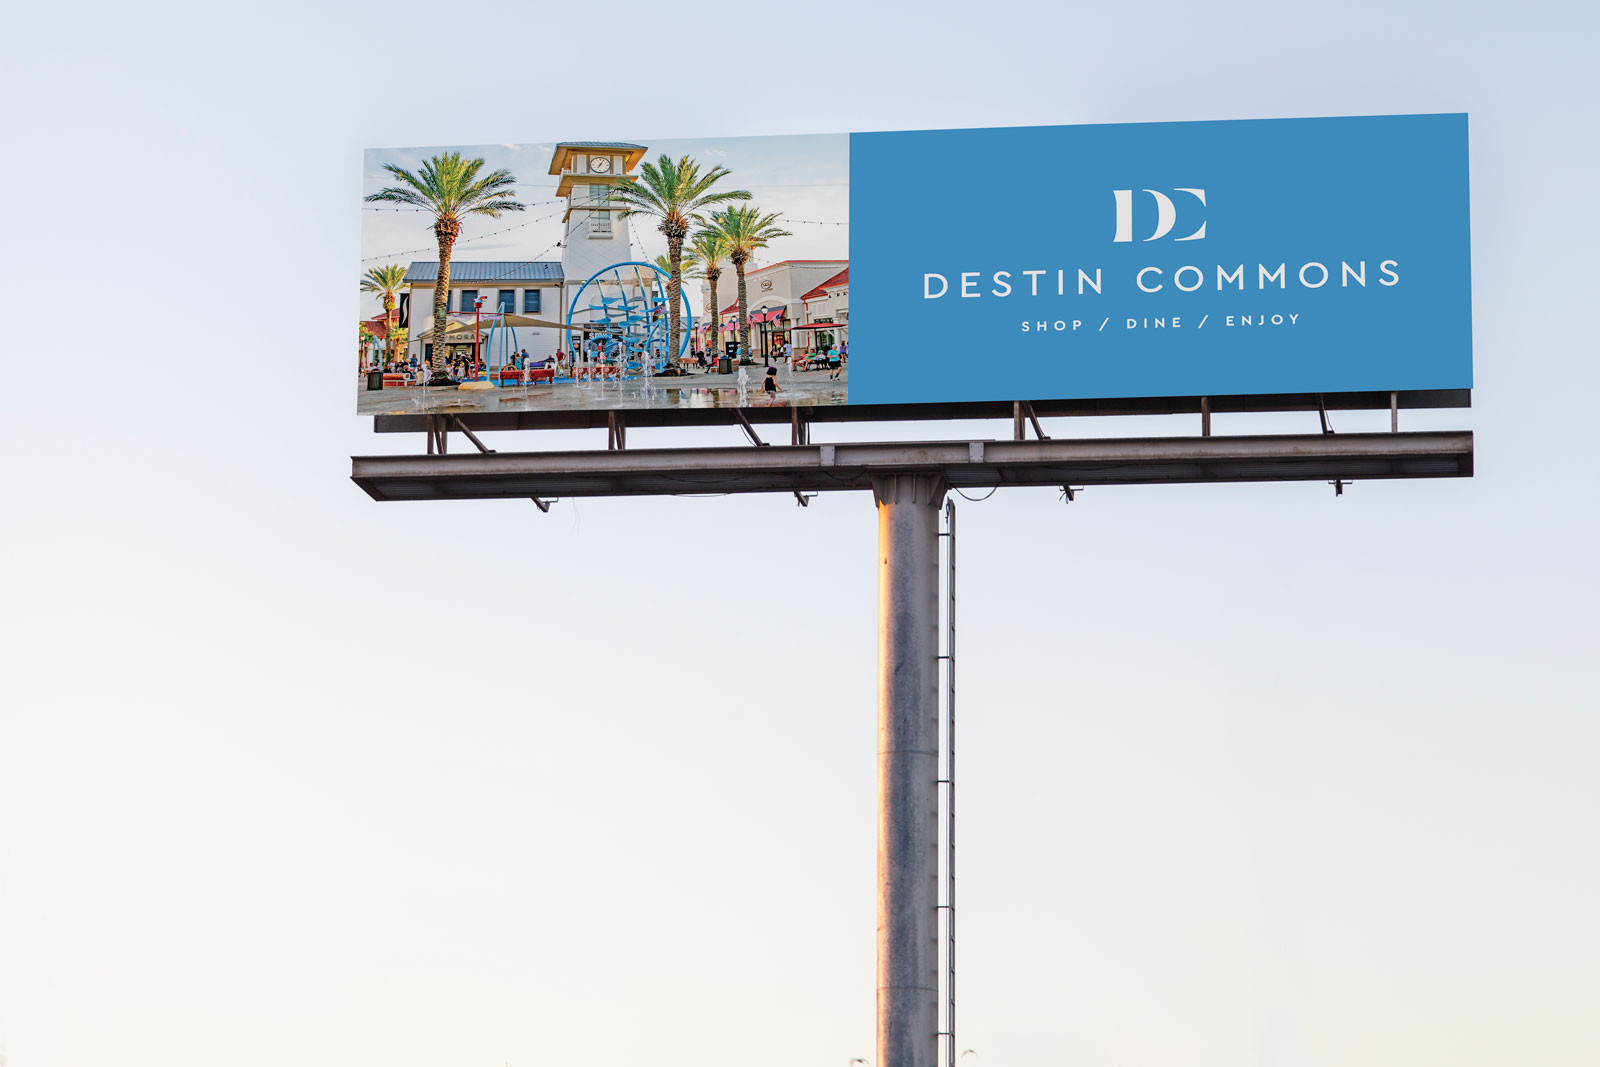 Clean and modern billboard design for local outdoor mall